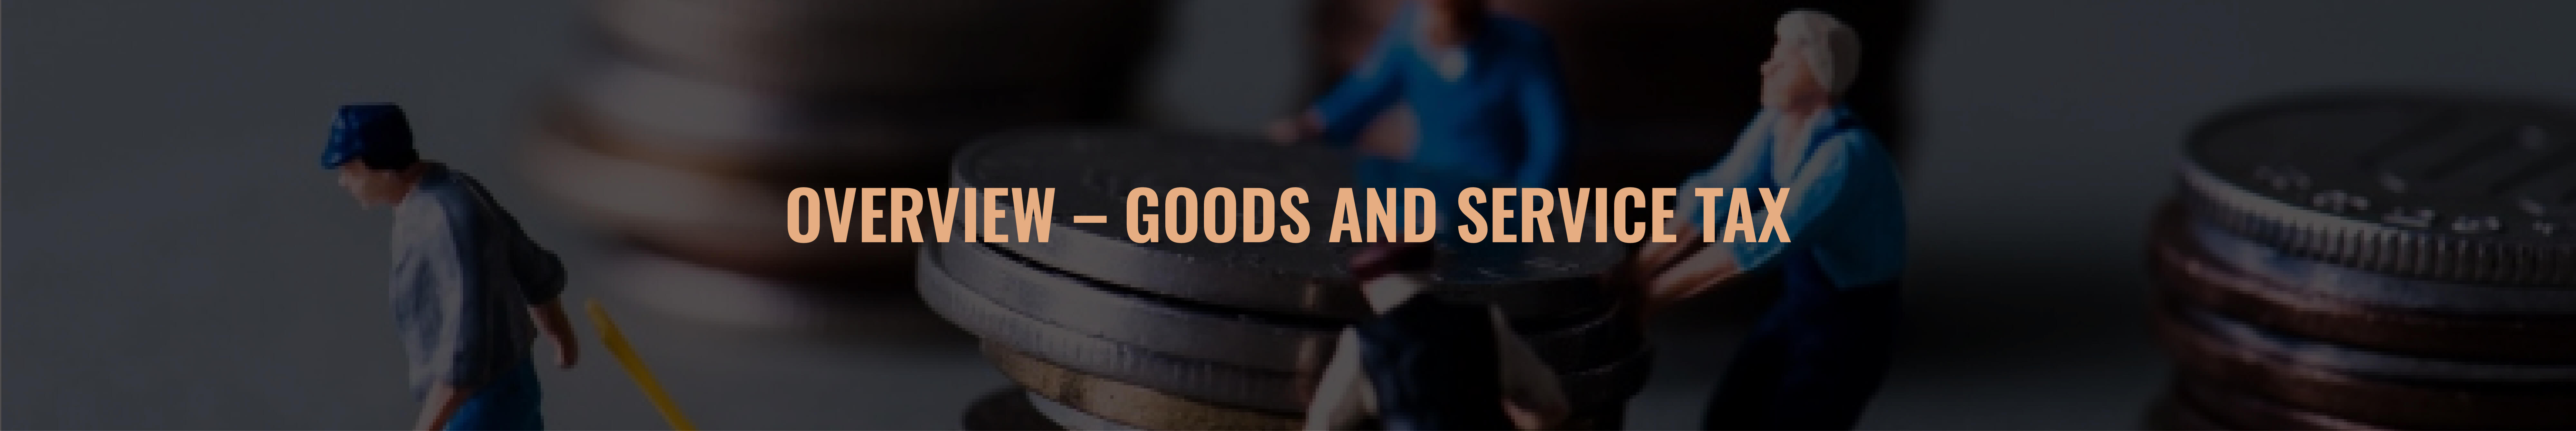 Overview - Goods And Service Tax